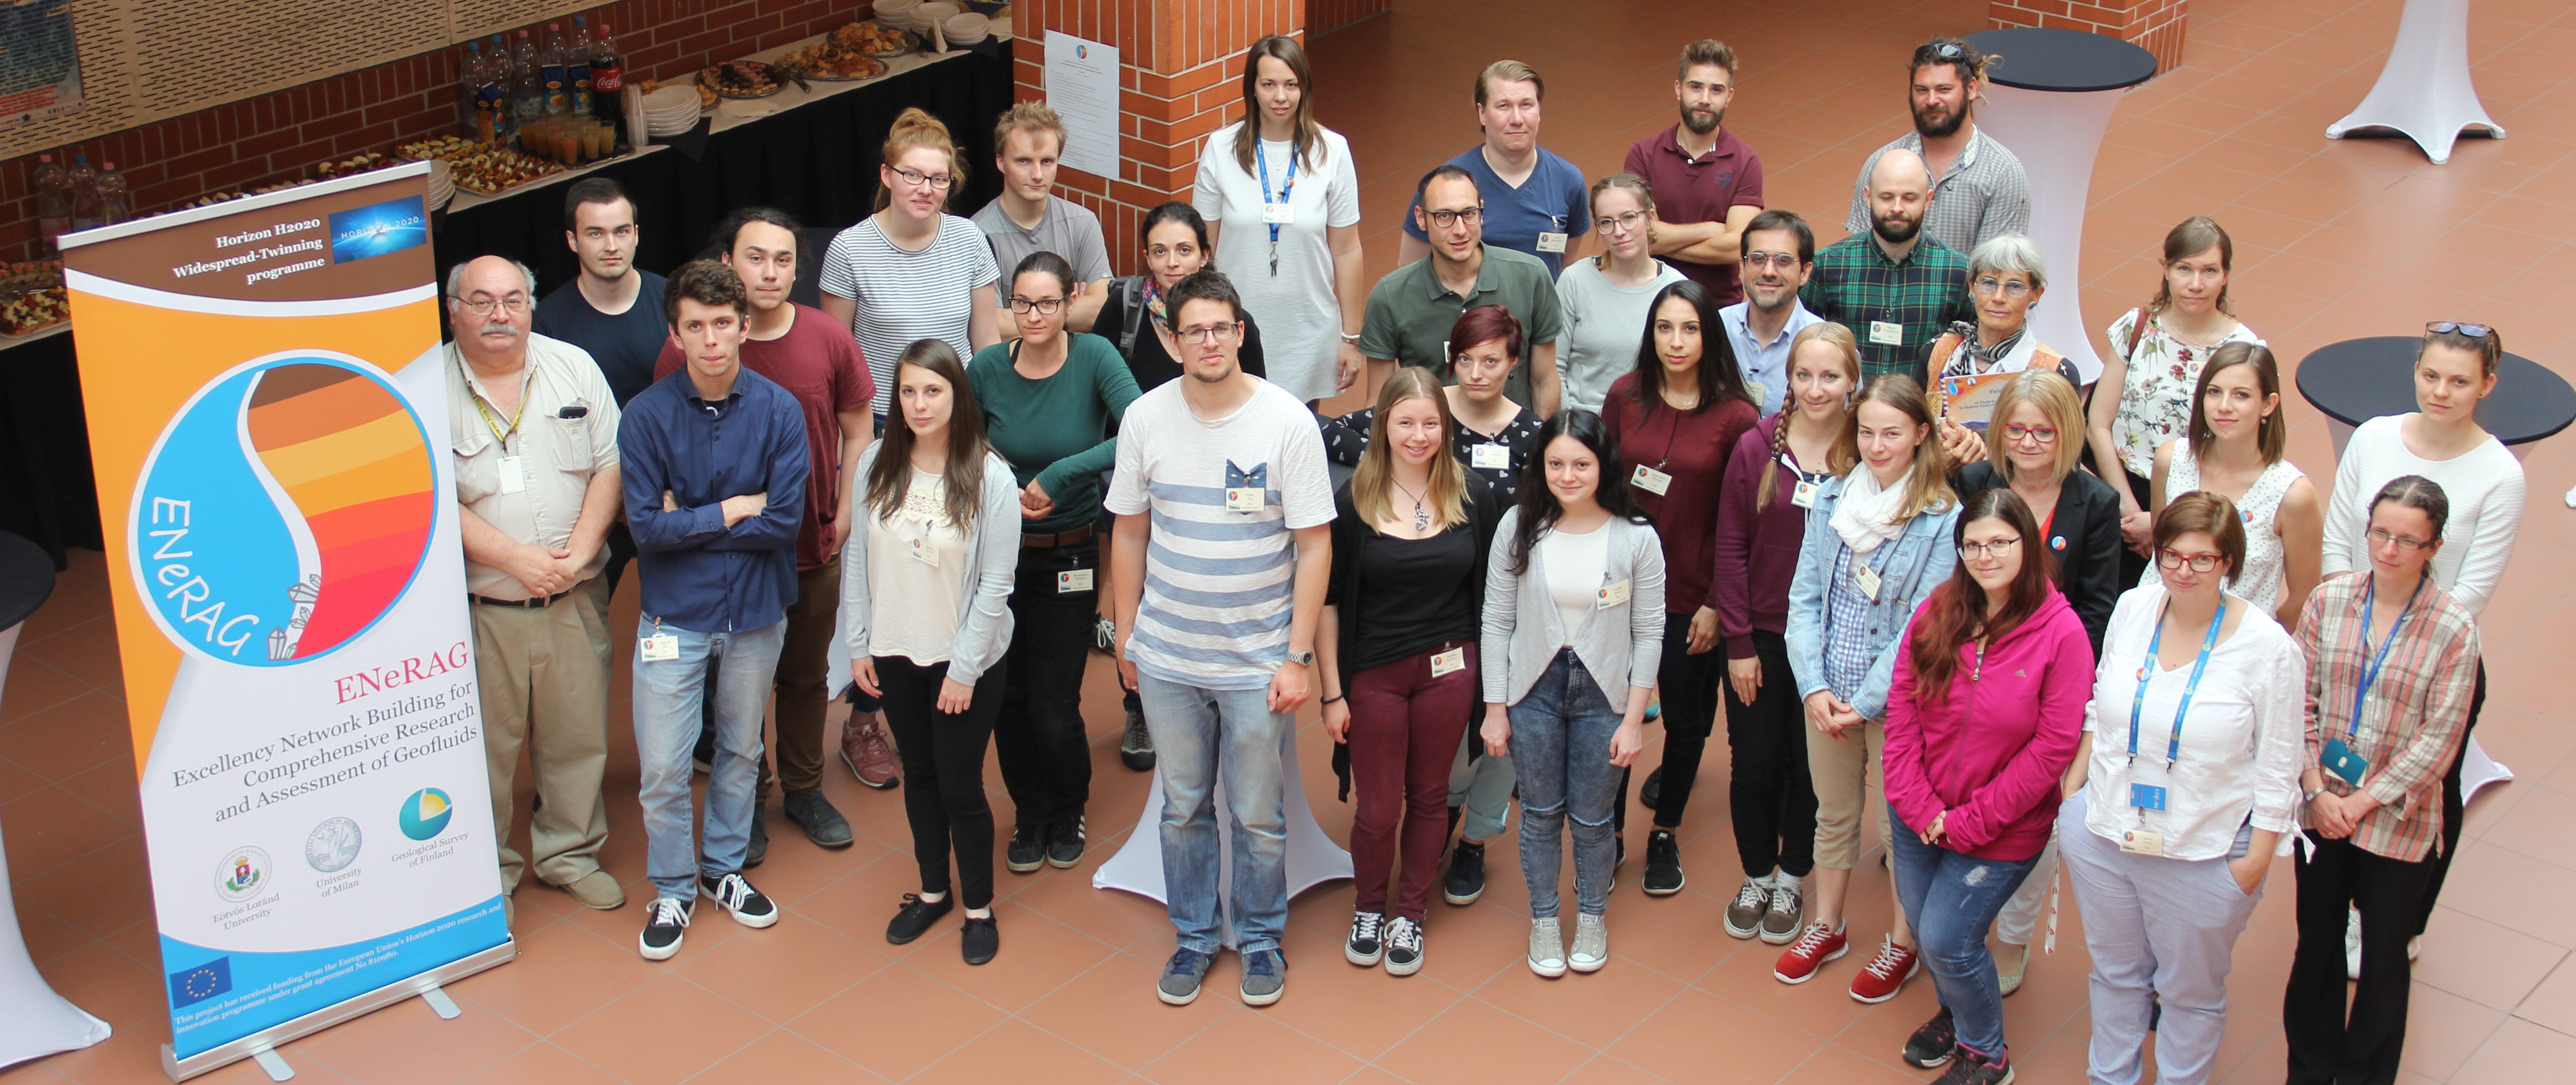 Field course on Fluid-rock interaction in shallow hydrothermal systems – 27-31 May 2019, Hungary